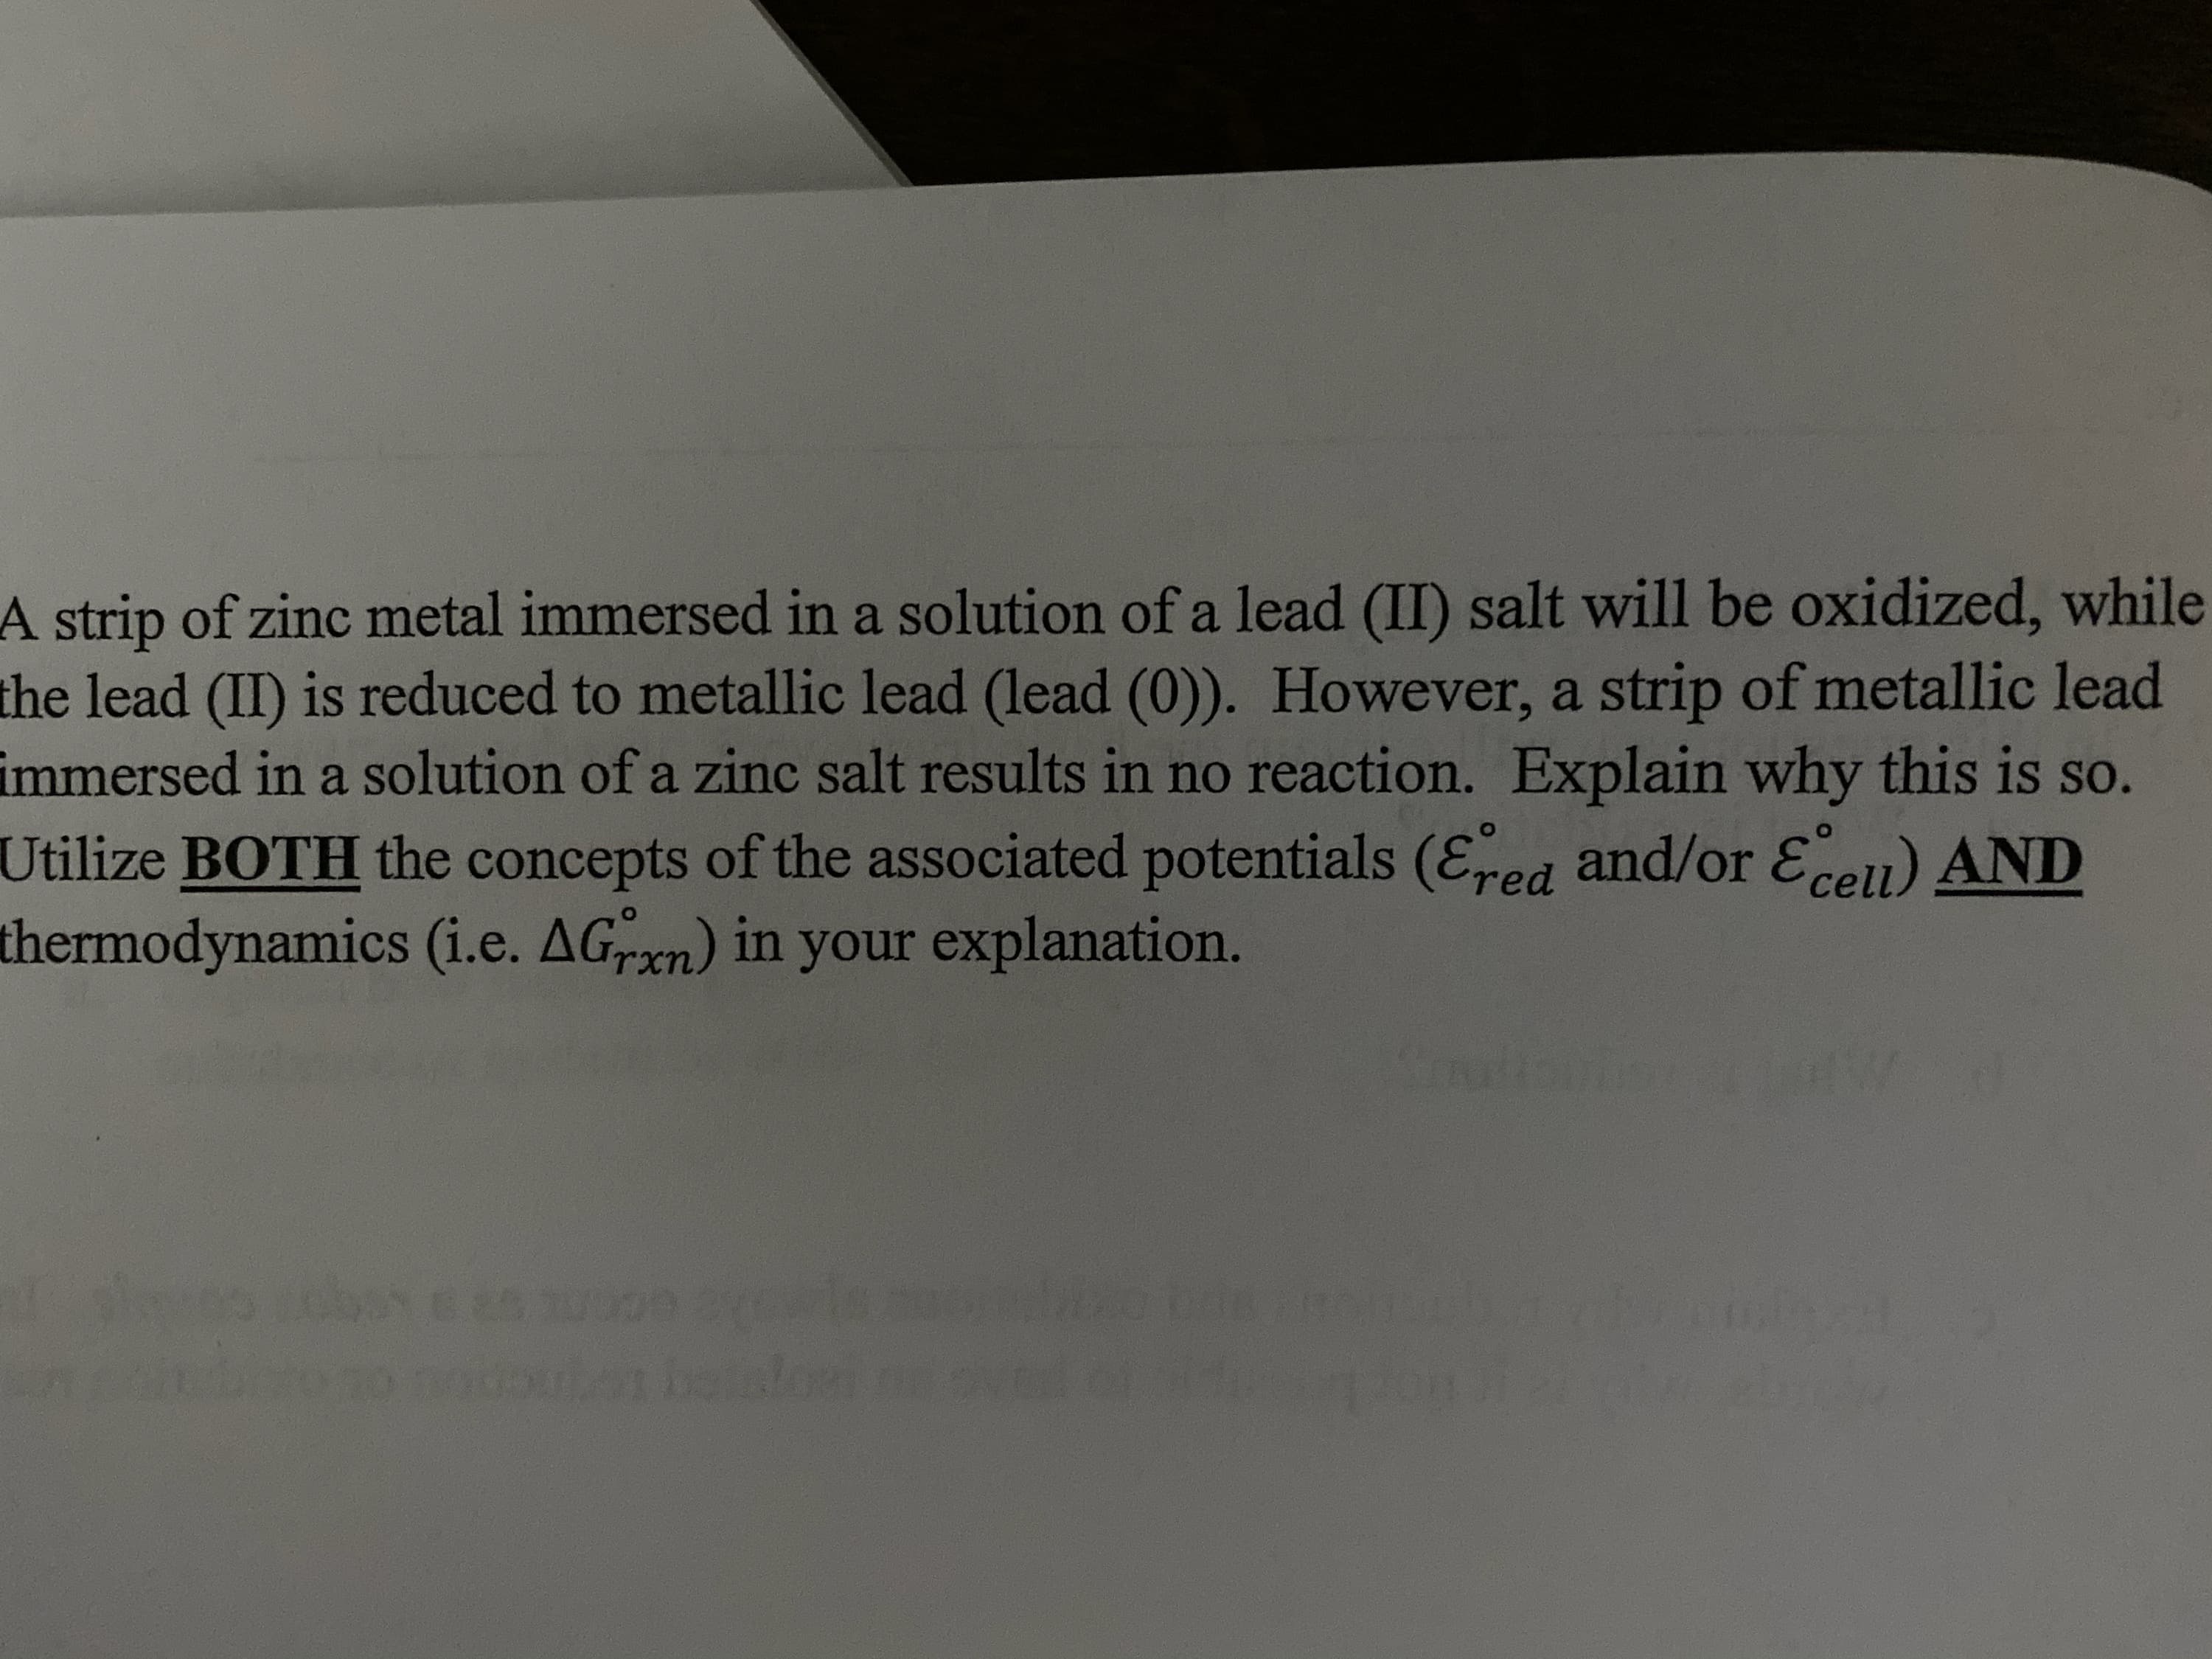 A strip of zinc metal immersed in a solution of a lead (II) salt will be oxidized, while
the lead (II) is reduced to metallic lead (lead (0)). However, a strip of metallic lead
immersed in a solution of a zinc salt results in no reaction. Explain why this is so.
Utilize BOTH the concepts of the associated potentials (Eed and/or Eeu) AND
thermodynamics (i.e. AGrxn) in your explanation.
beale
nonouon hlo
